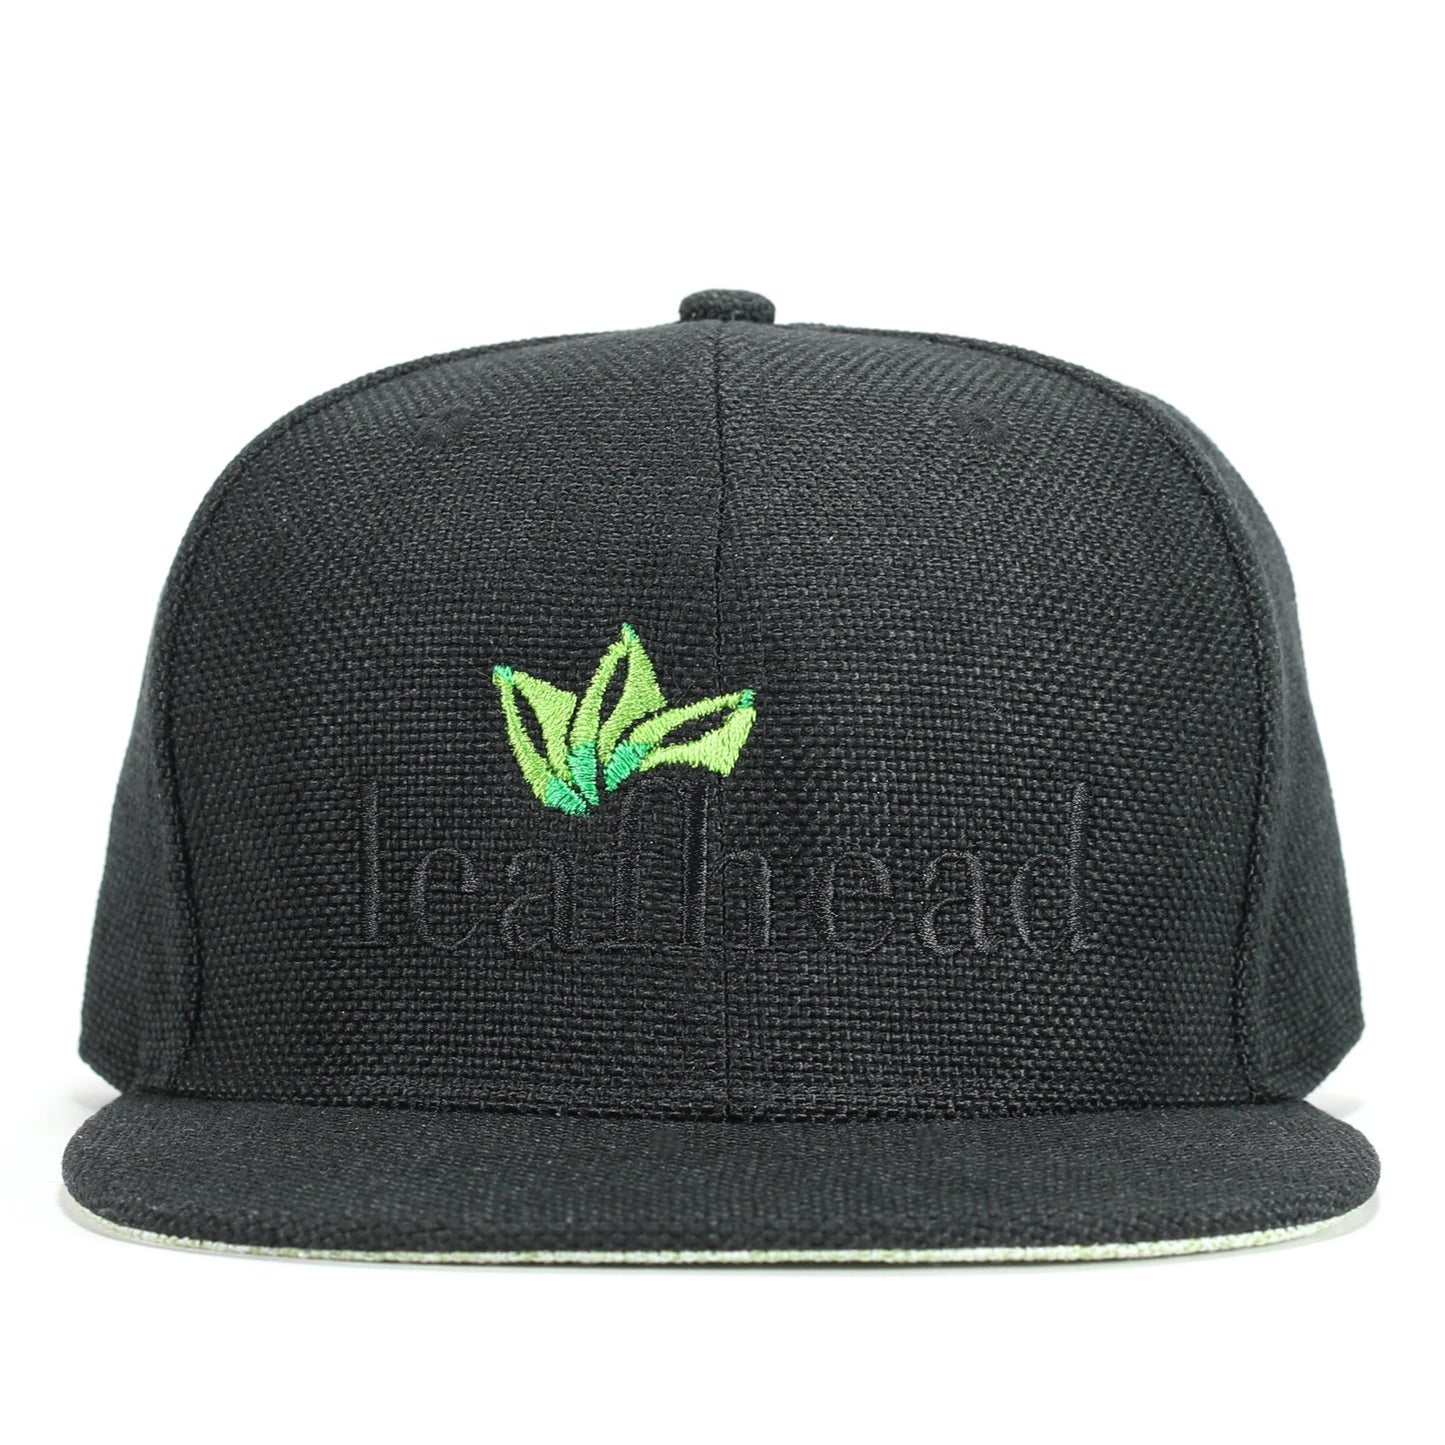 Hat Hemp - Photography and Web Design - Los Angeles, US based Shopify Experts Revo Designs